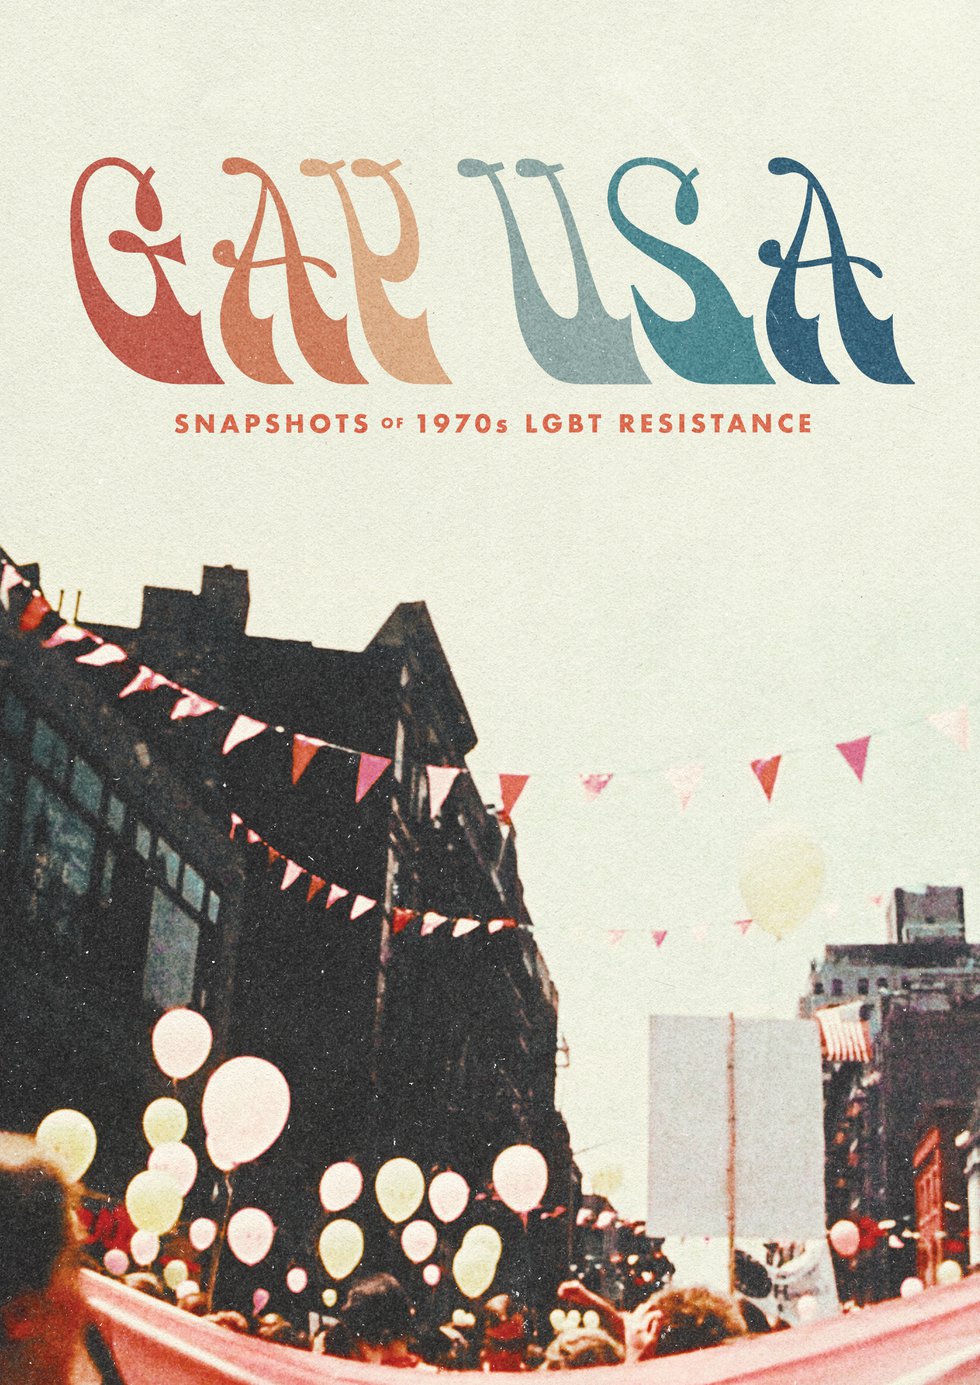 Gay USA: Snapshots of 1970s LGBT Resistance Documentary